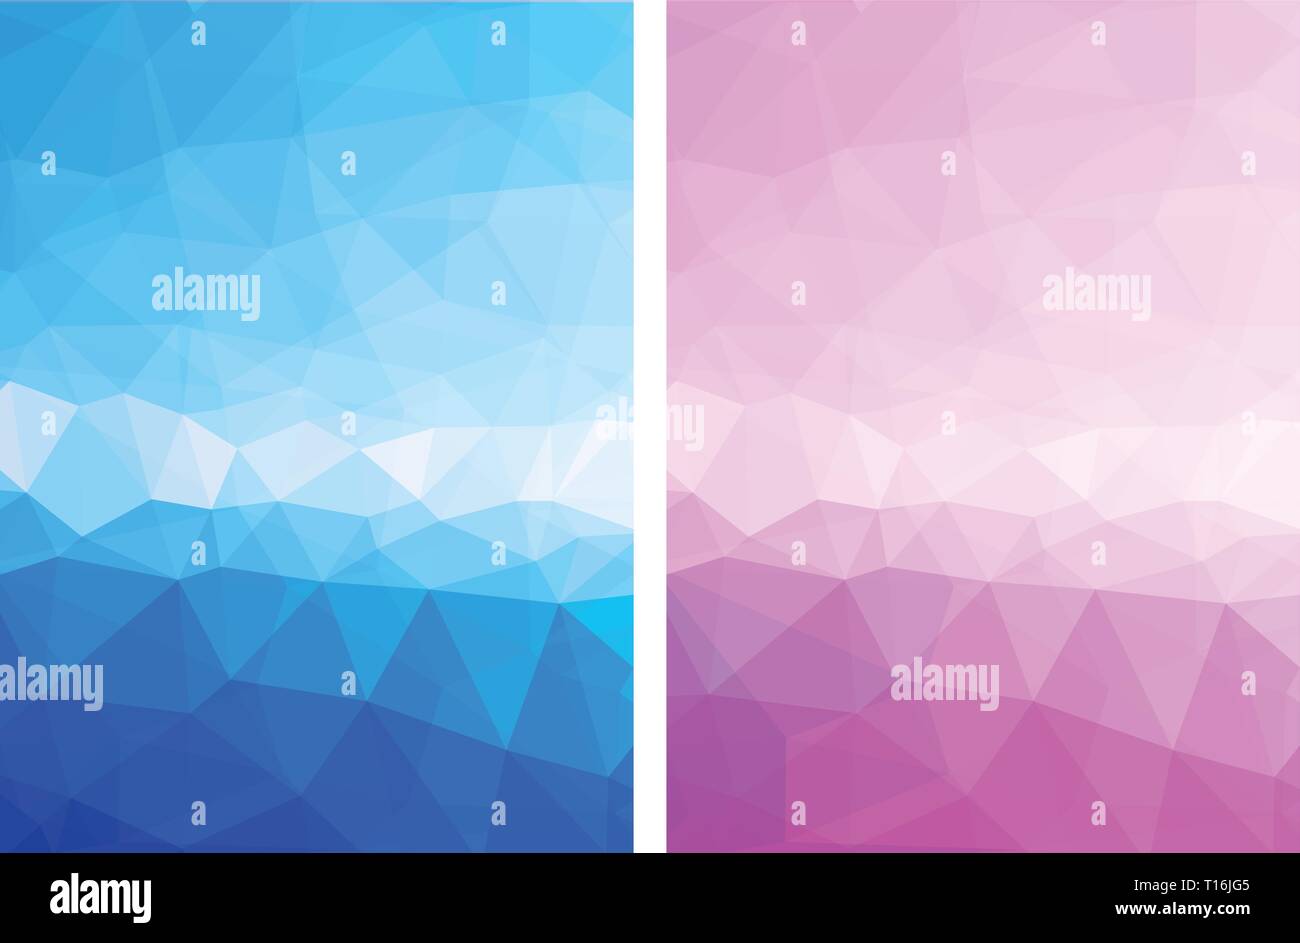 Elegant blue pink abstract low polygon vector background set Stock Vector